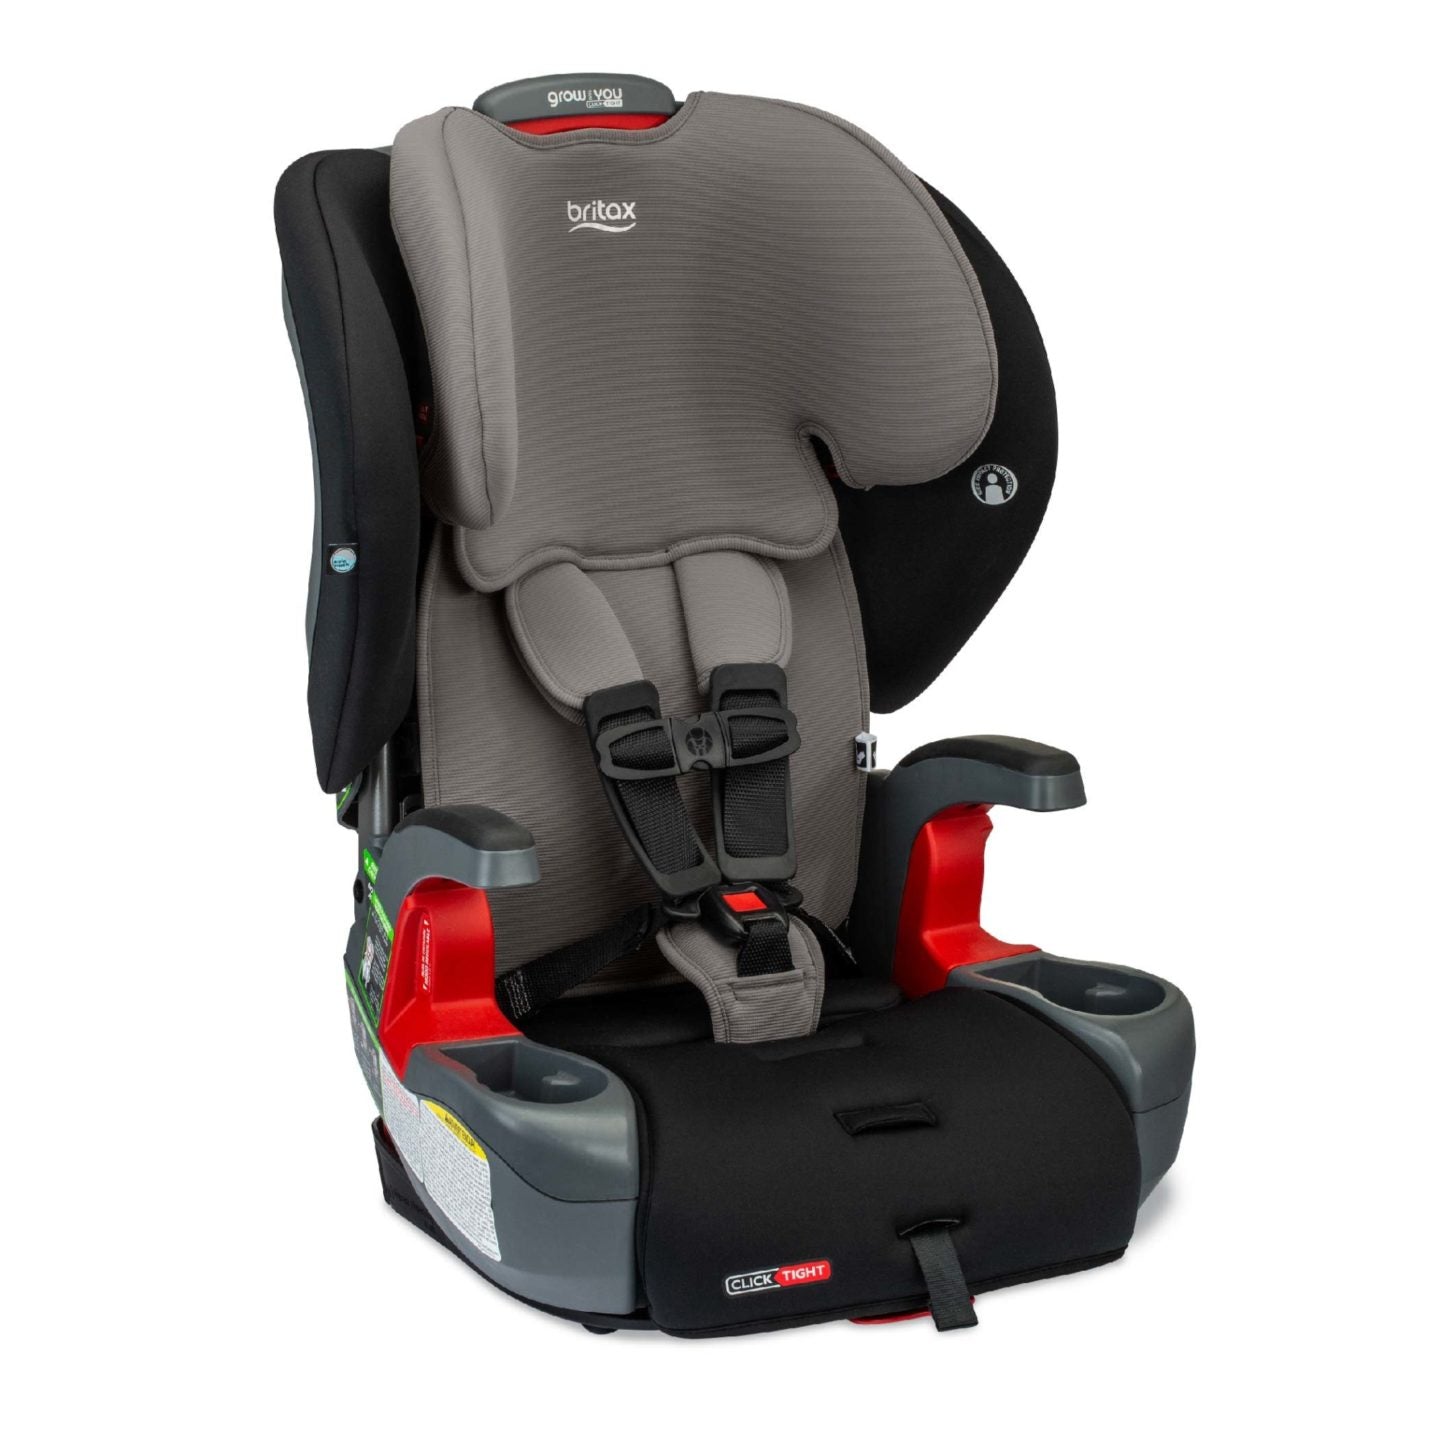 BRITAX Grow With You Harness-to-Booster Car Seat with ClickTight - ANB Baby -652182742850$300 - $500